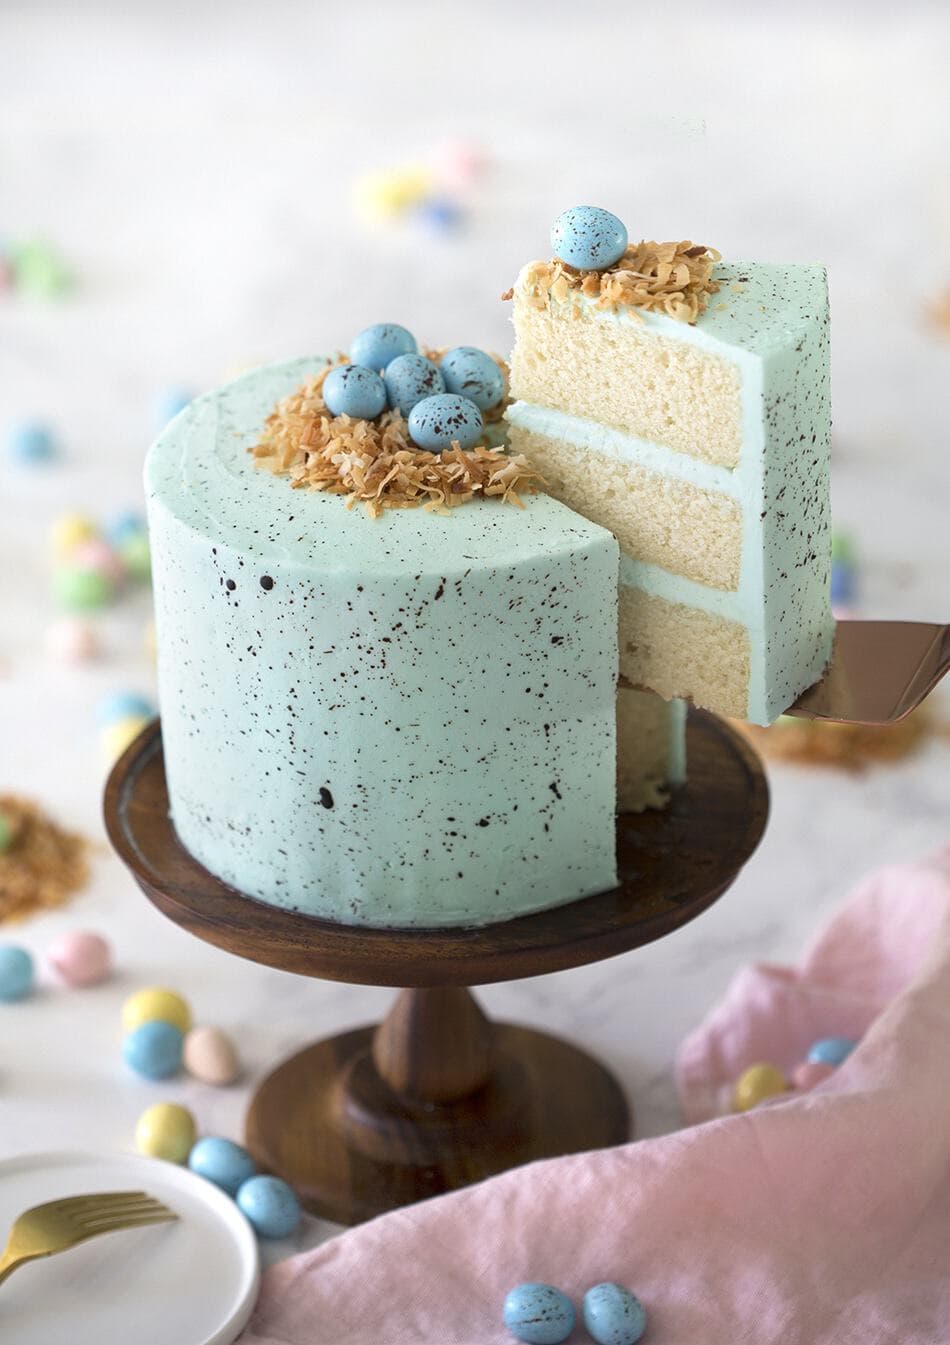 A three layered white cake, with a blue speckled frosting, topped with toasted coconut and blue candied eggs on top.